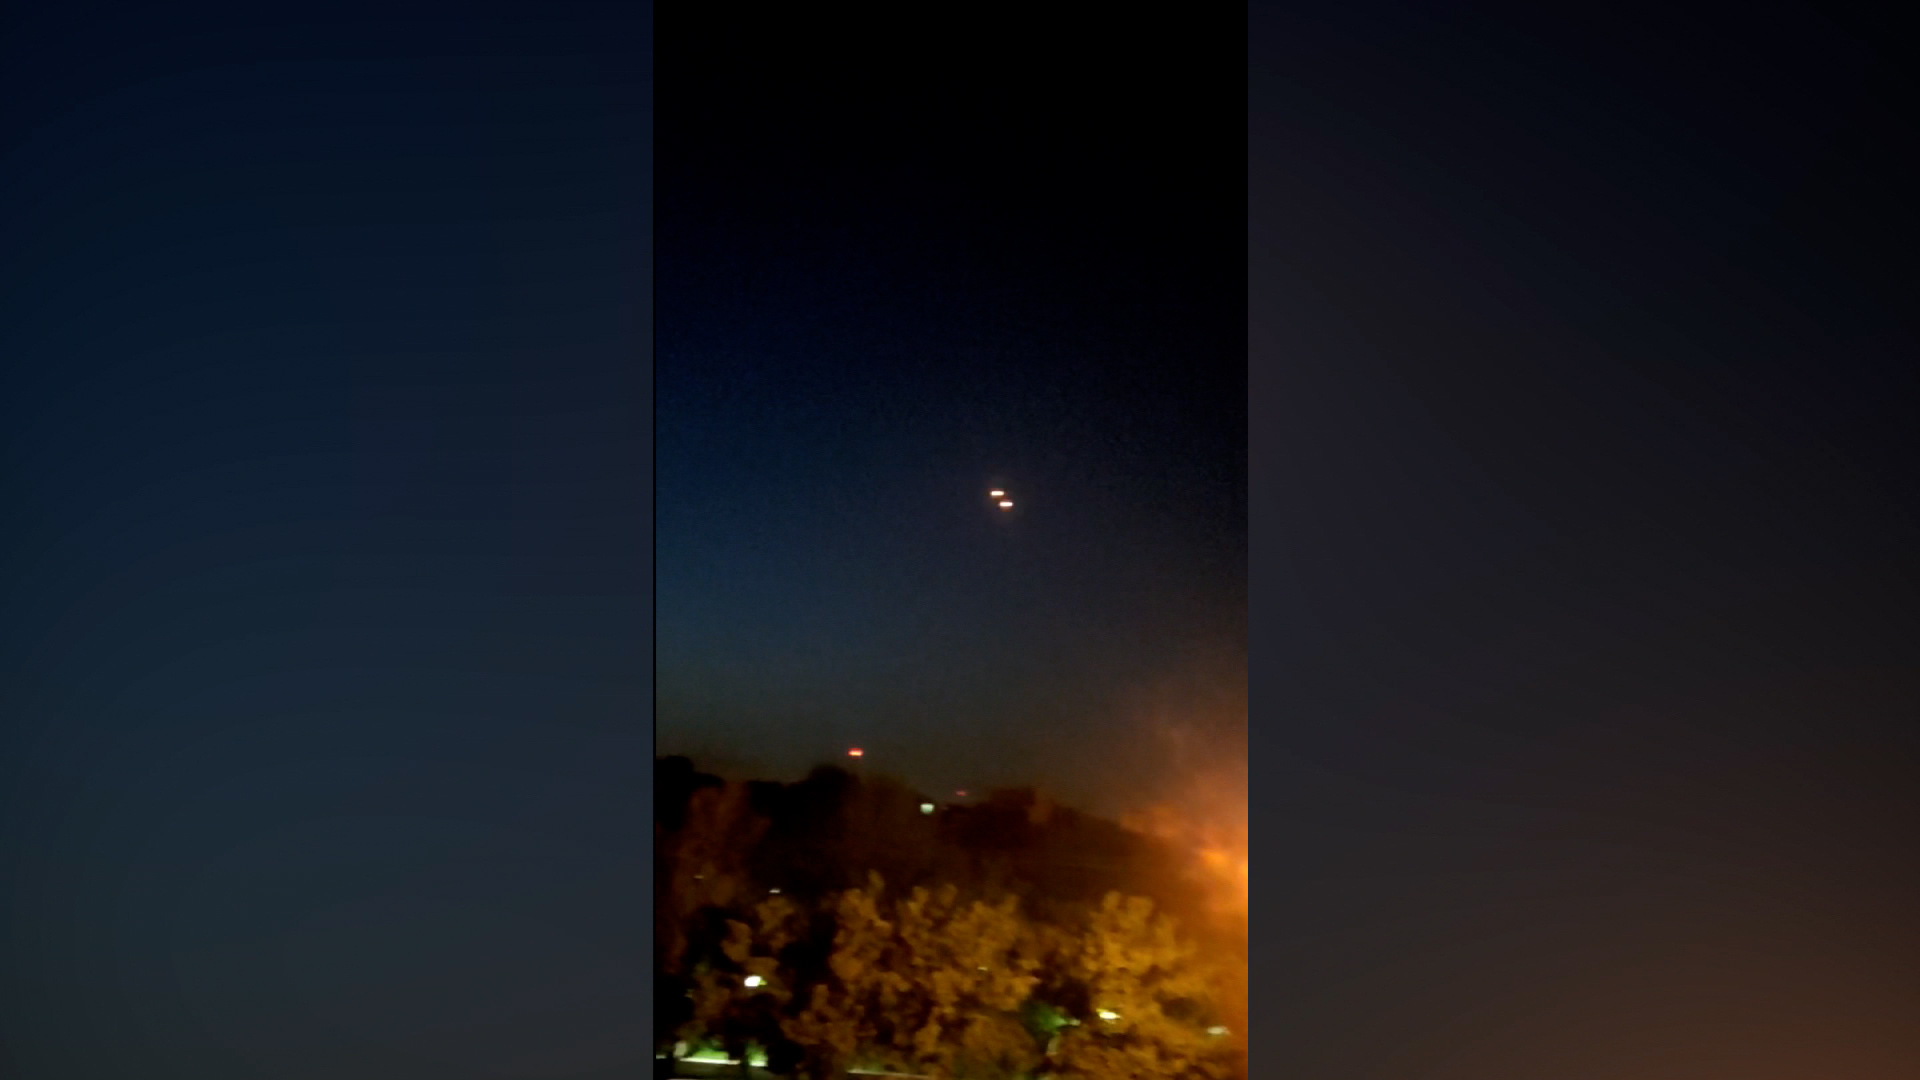 IRGC released a photo that it said showed flashes in the sky of Isfahan, Iran following reports of explosions.